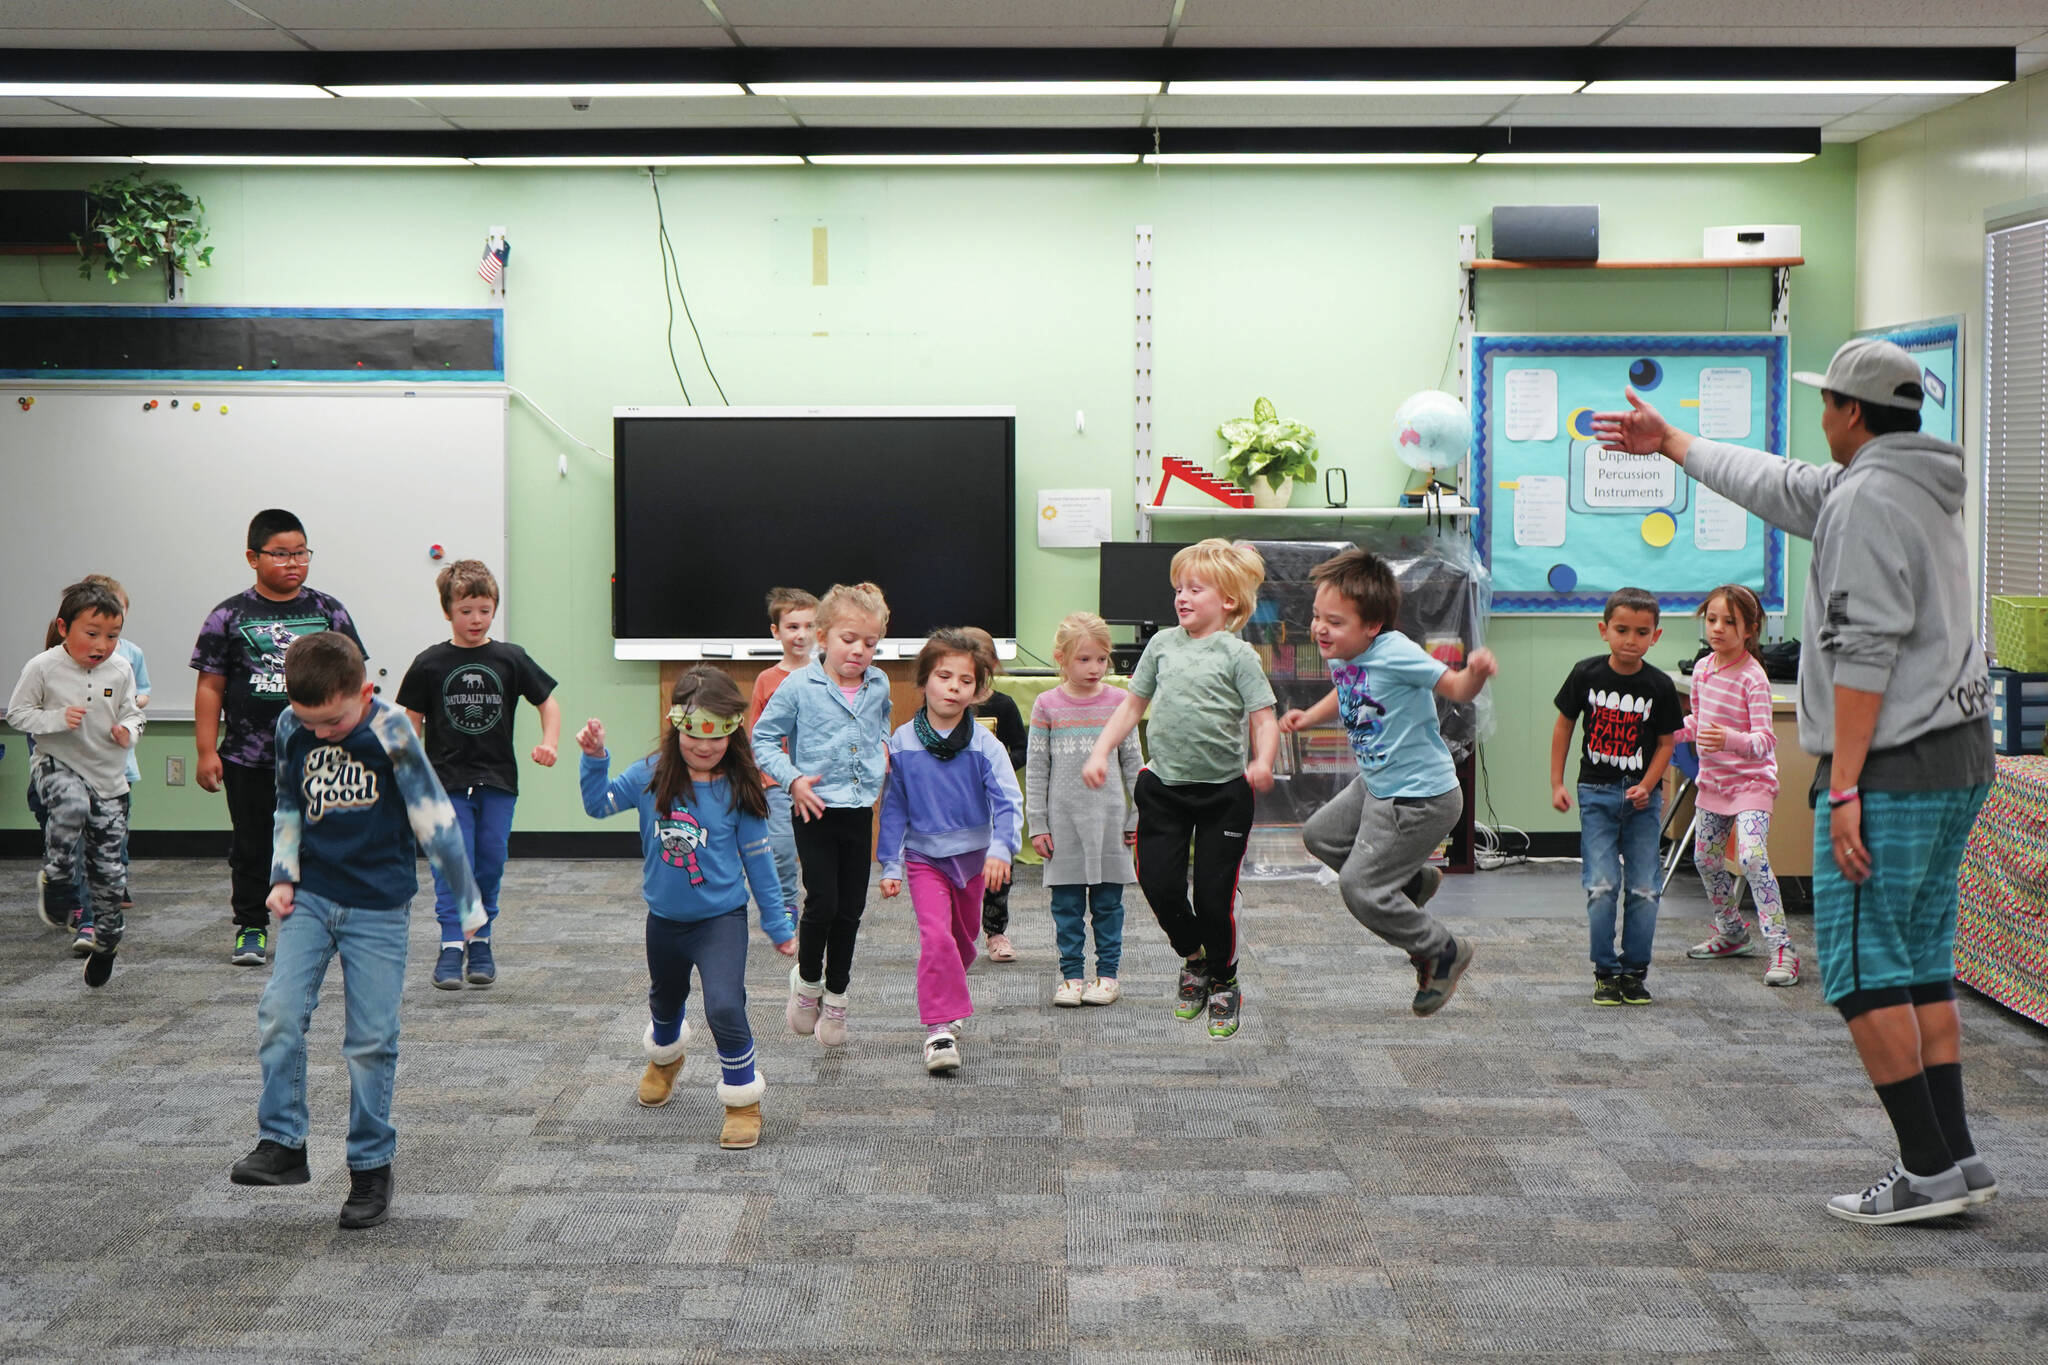 Jake Dye/Peninsula Clarion
Jessie Soyangco, right, leads a class of kindergarteners in dancing to a remix of the “Little Einstein’s” theme song at Kaleidoscope School of Arts and Science in Kenai on Thursday.